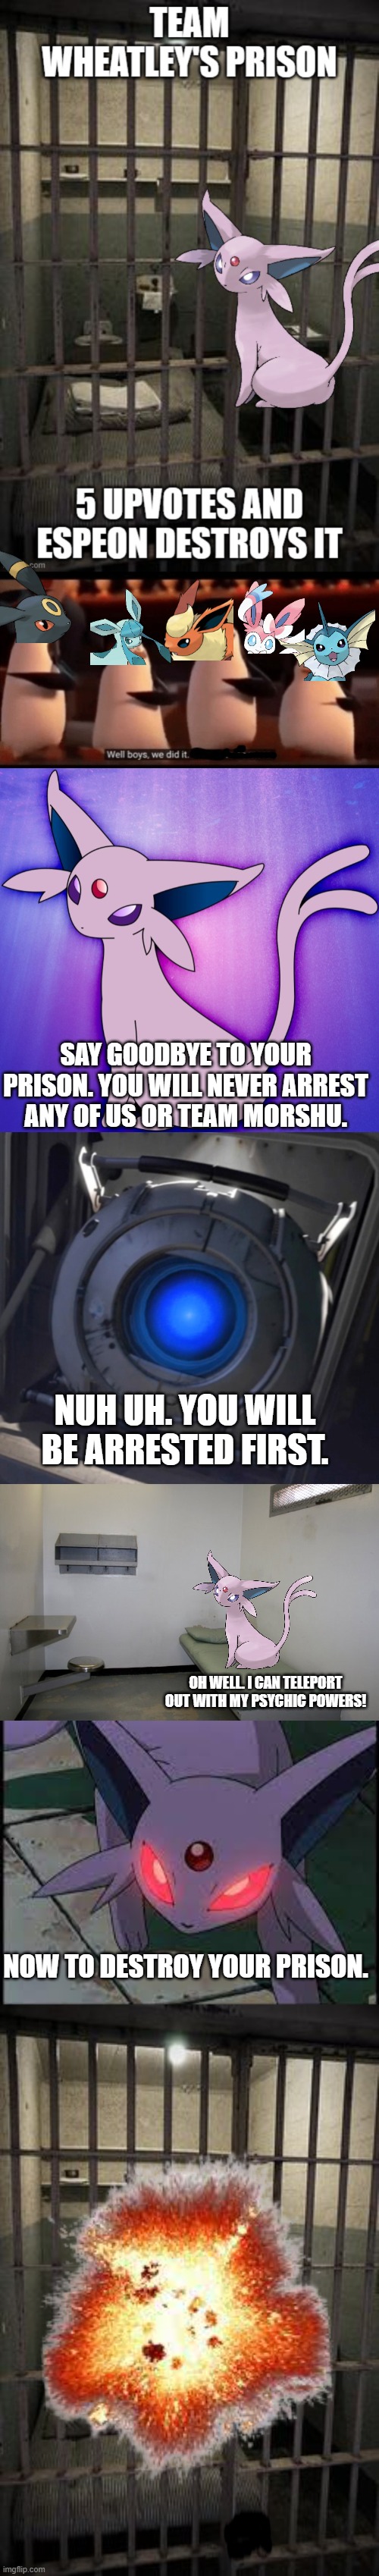 Just realised I forgot to include the upvote count, but it did hit 5 | SAY GOODBYE TO YOUR PRISON. YOU WILL NEVER ARREST ANY OF US OR TEAM MORSHU. NUH UH. YOU WILL BE ARRESTED FIRST. OH WELL. I CAN TELEPORT OUT WITH MY PSYCHIC POWERS! NOW TO DESTROY YOUR PRISON. | made w/ Imgflip meme maker